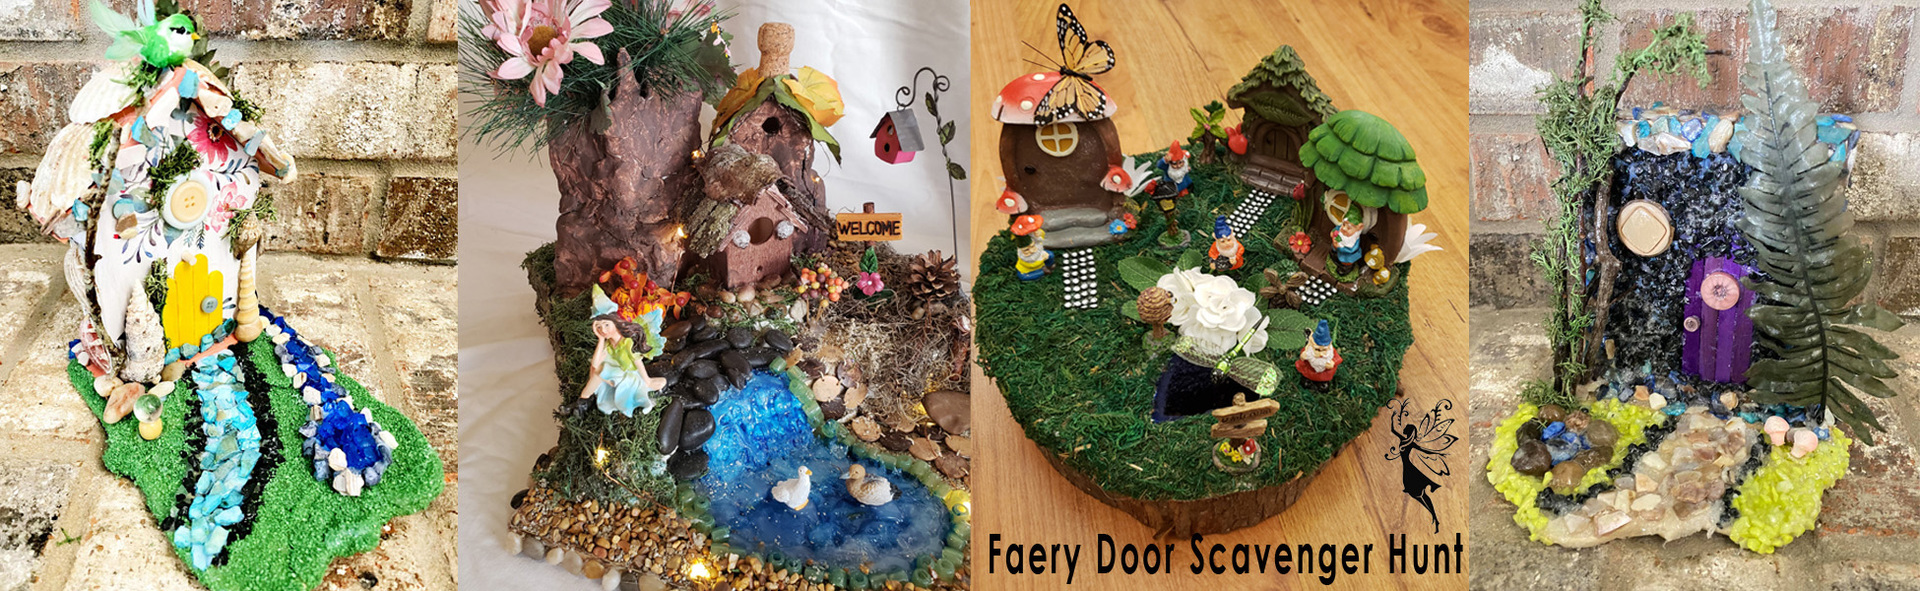 Faery Door Scavenger Hunt: All Ages Pre-Event for Faery Court Masquerade Ball - Sept 03-10, Biloxi, Mississippi, United States